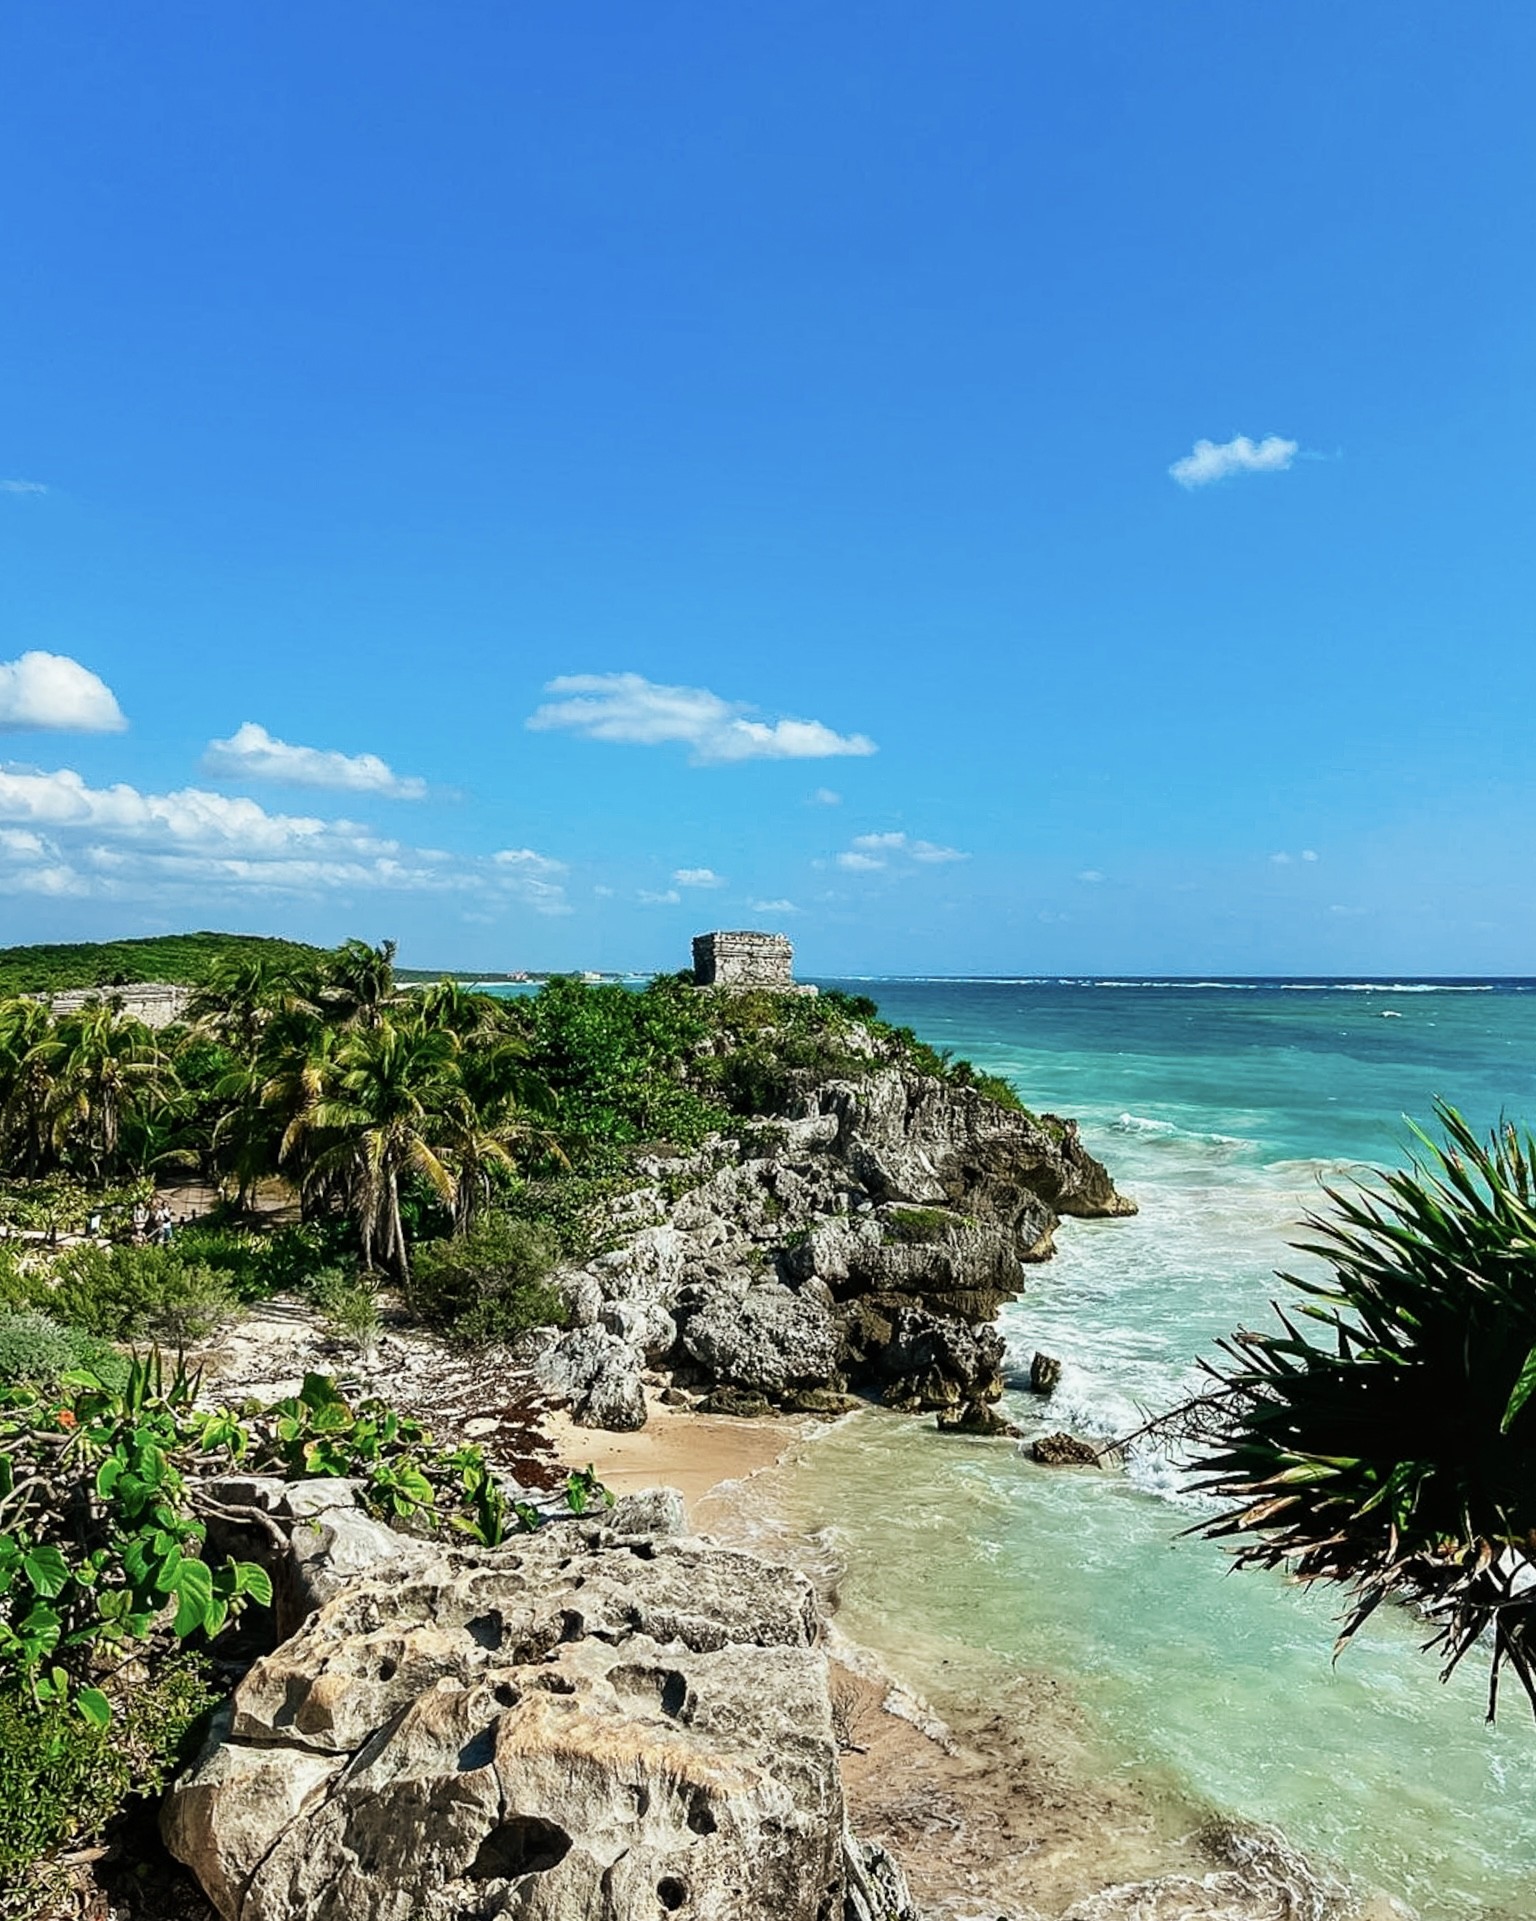 Tulum: The perfect blend of relaxation and adventure